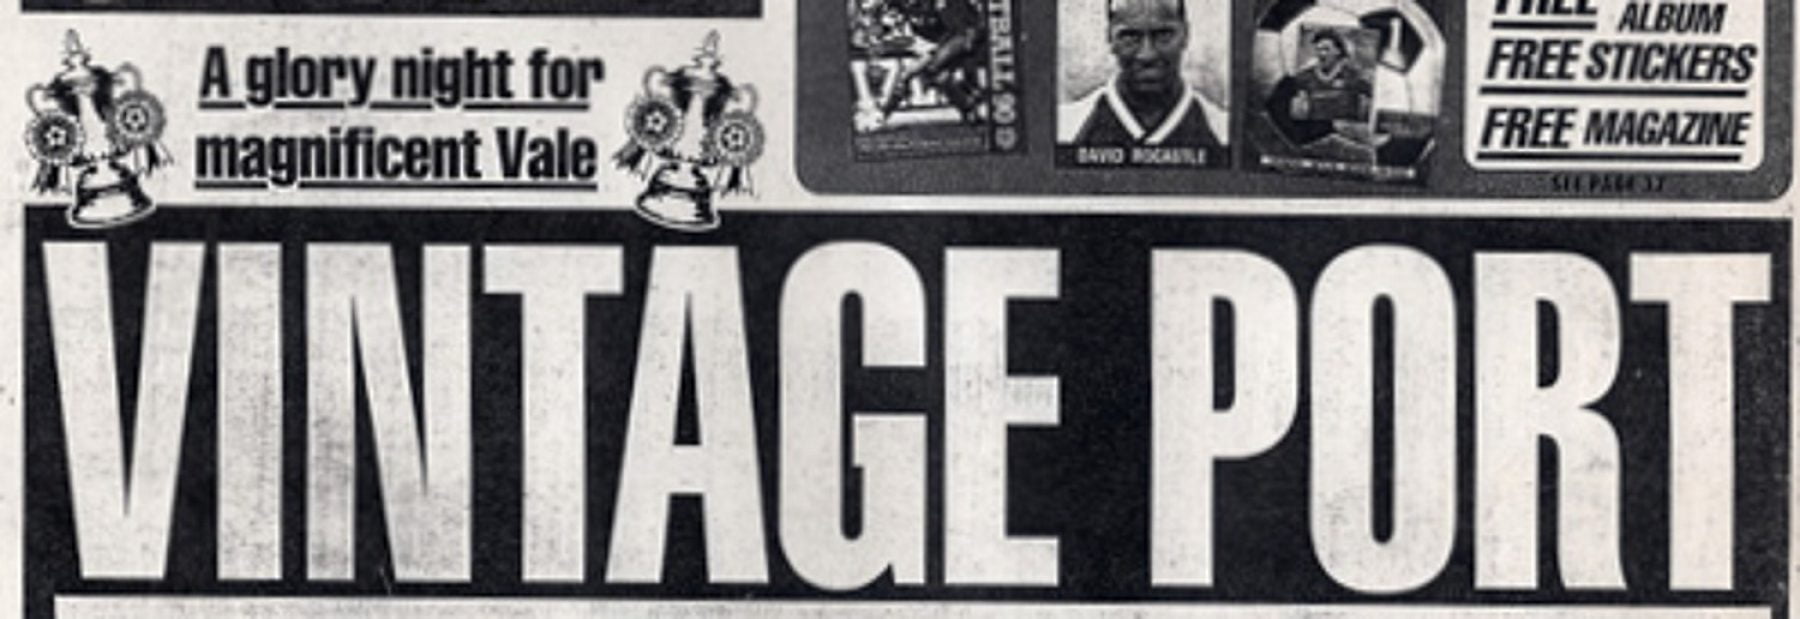 Derby County 2-3 Port Vale, FA Cup, 1990 - Daily Mirror headline